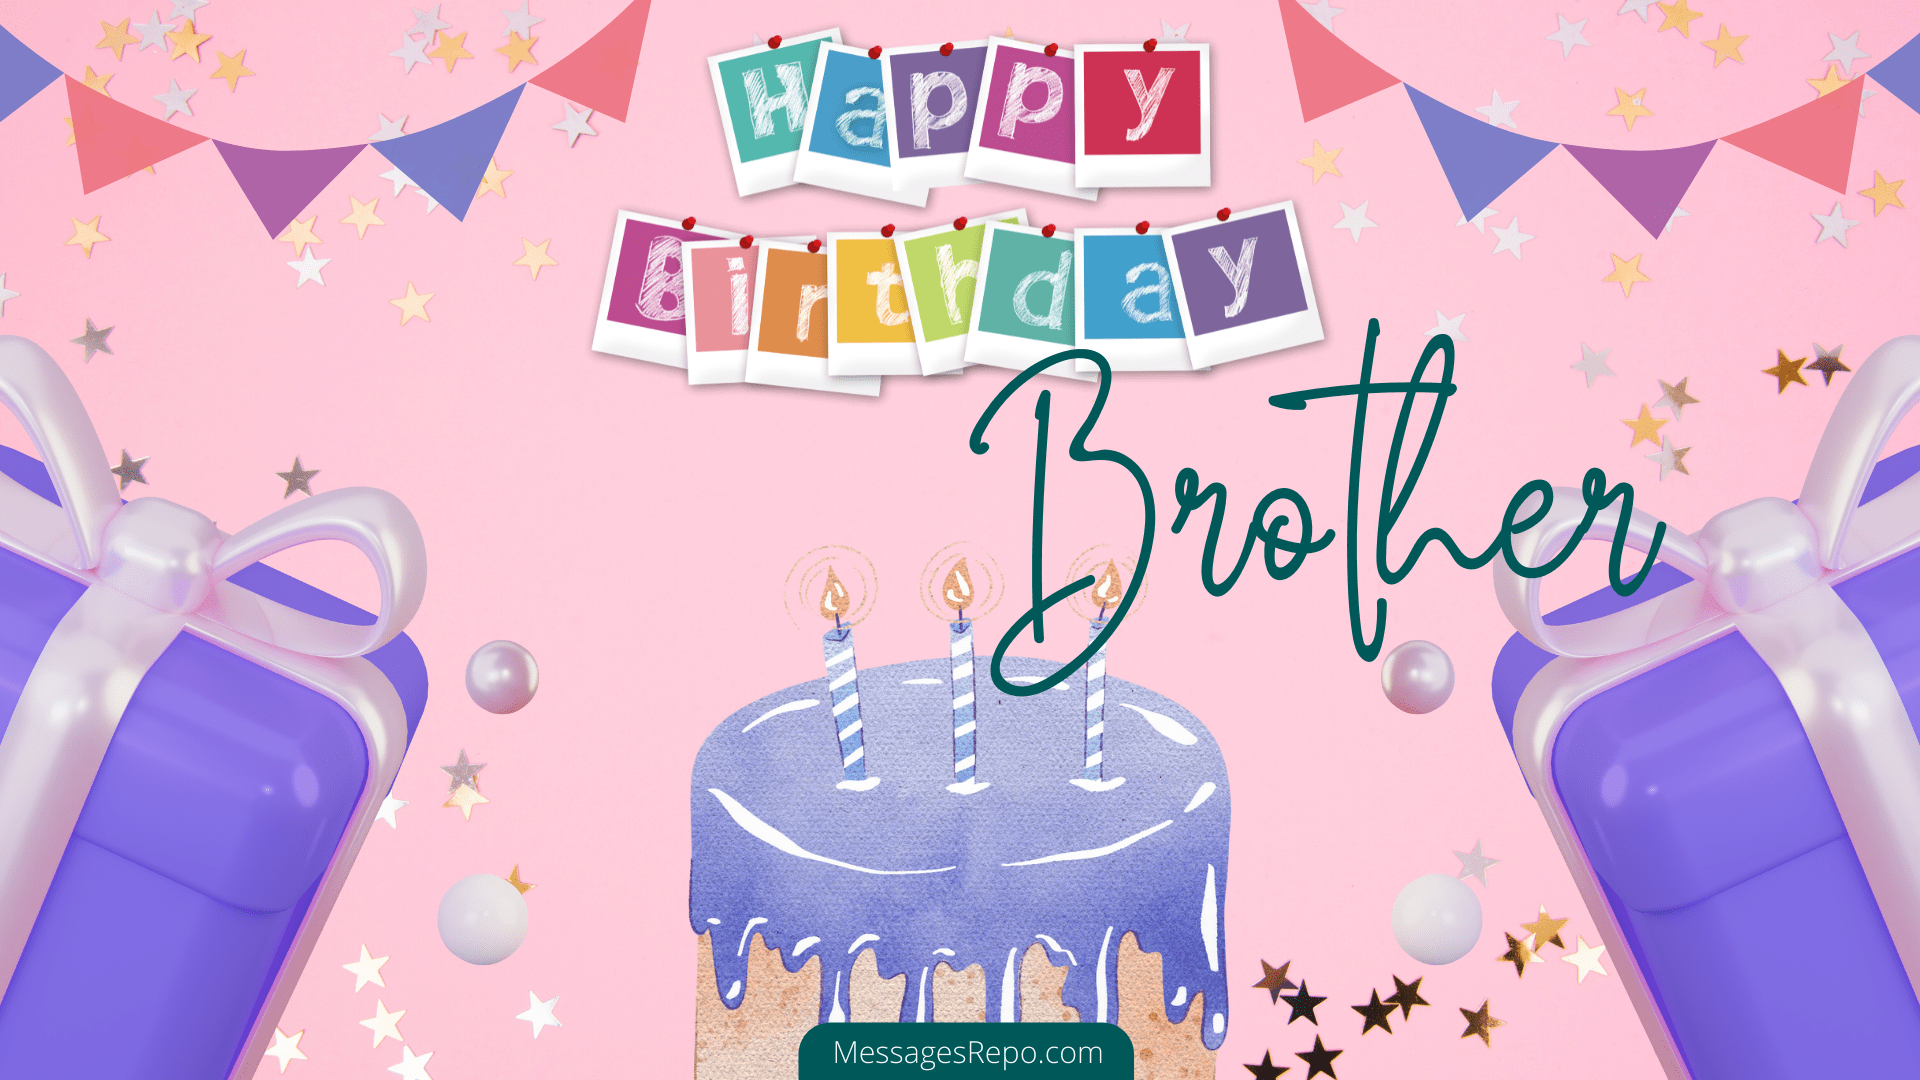 Happy Birthday Brother Wishes - MessagesRepo.com